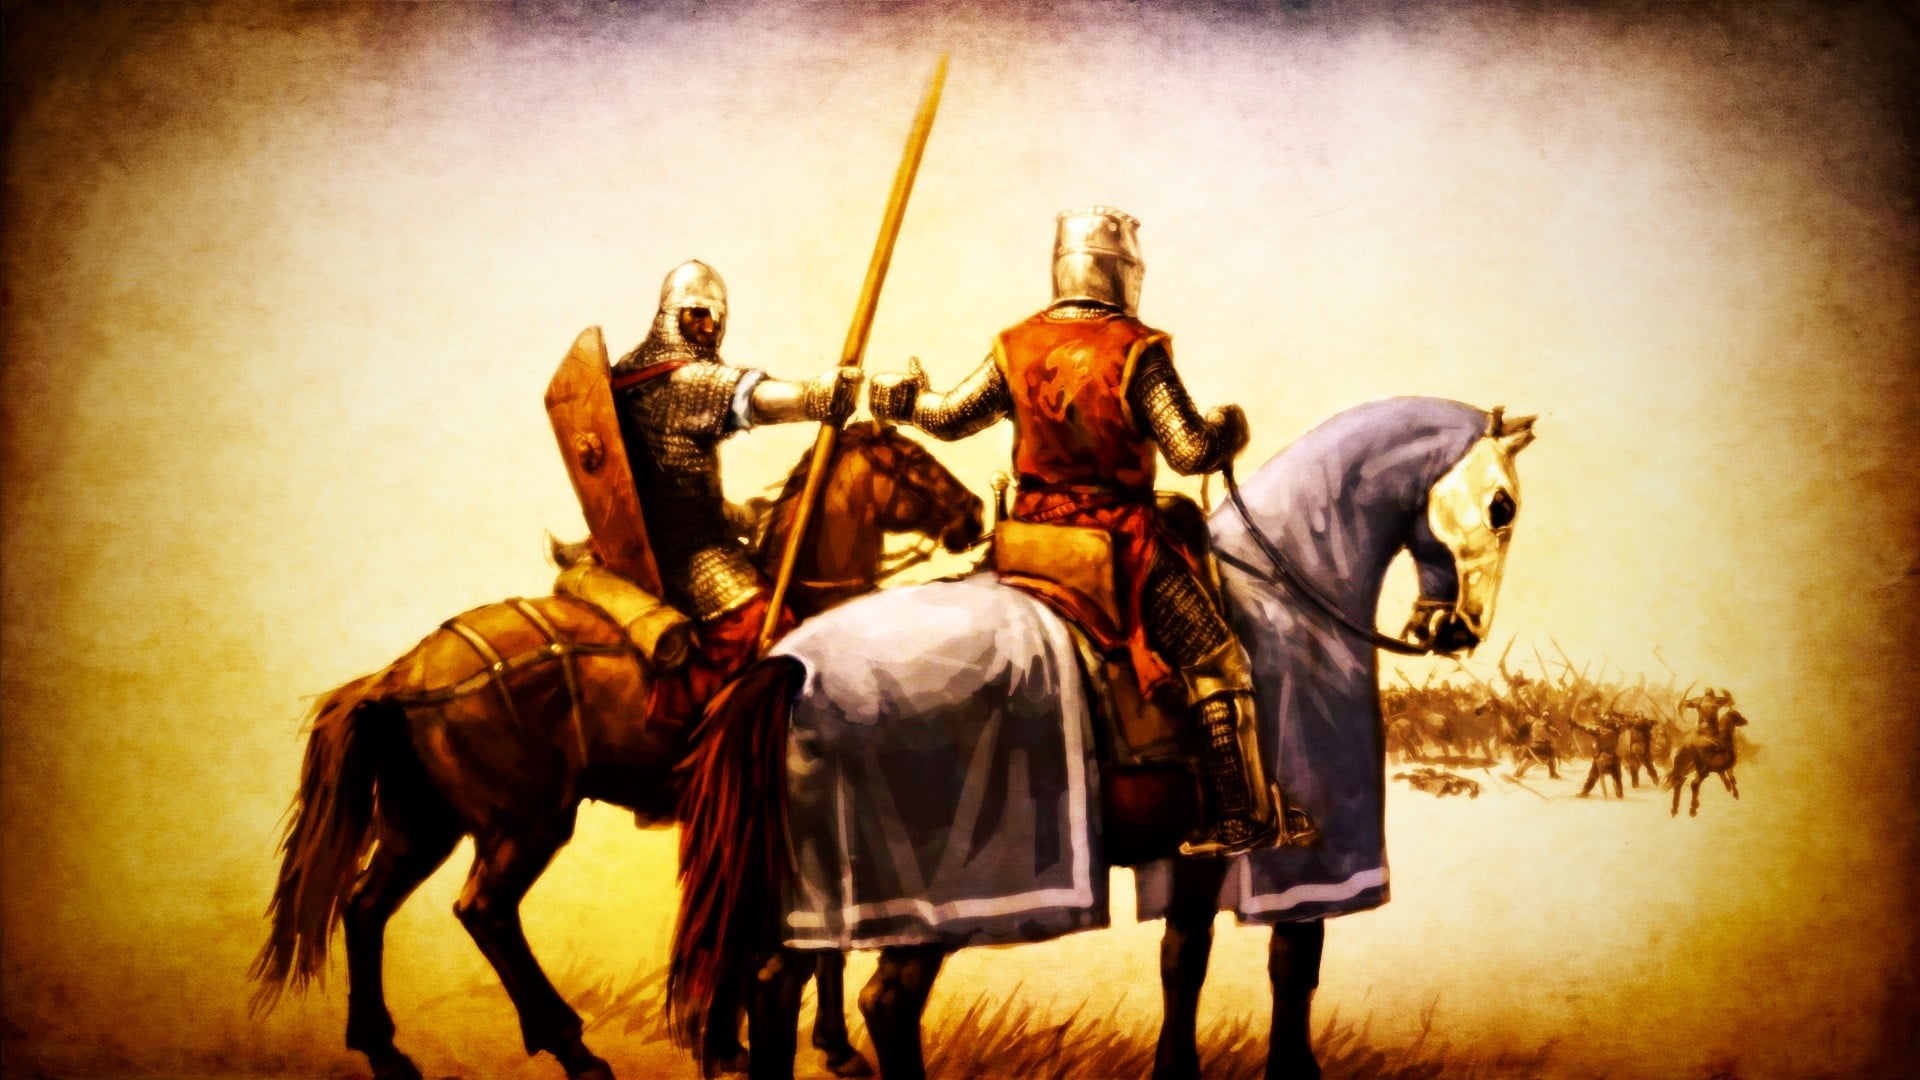 Digital painting of two knights, medieval, knight, horse, battle HD